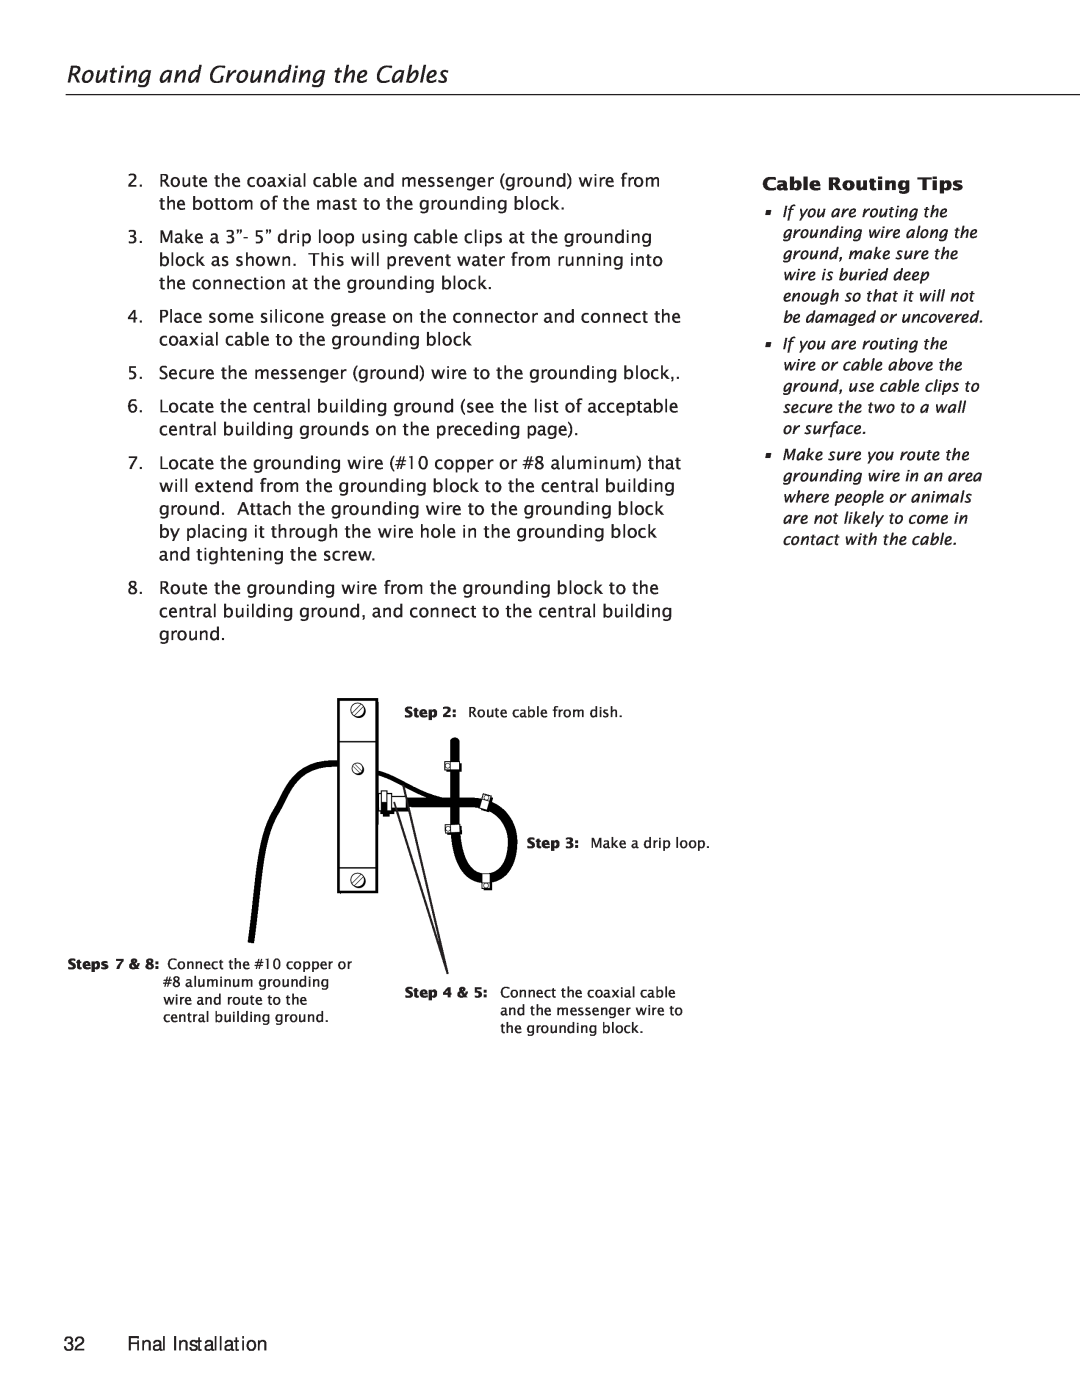 RCA Satellite TV Antenna manual Routing and Grounding the Cables, Final Installation 